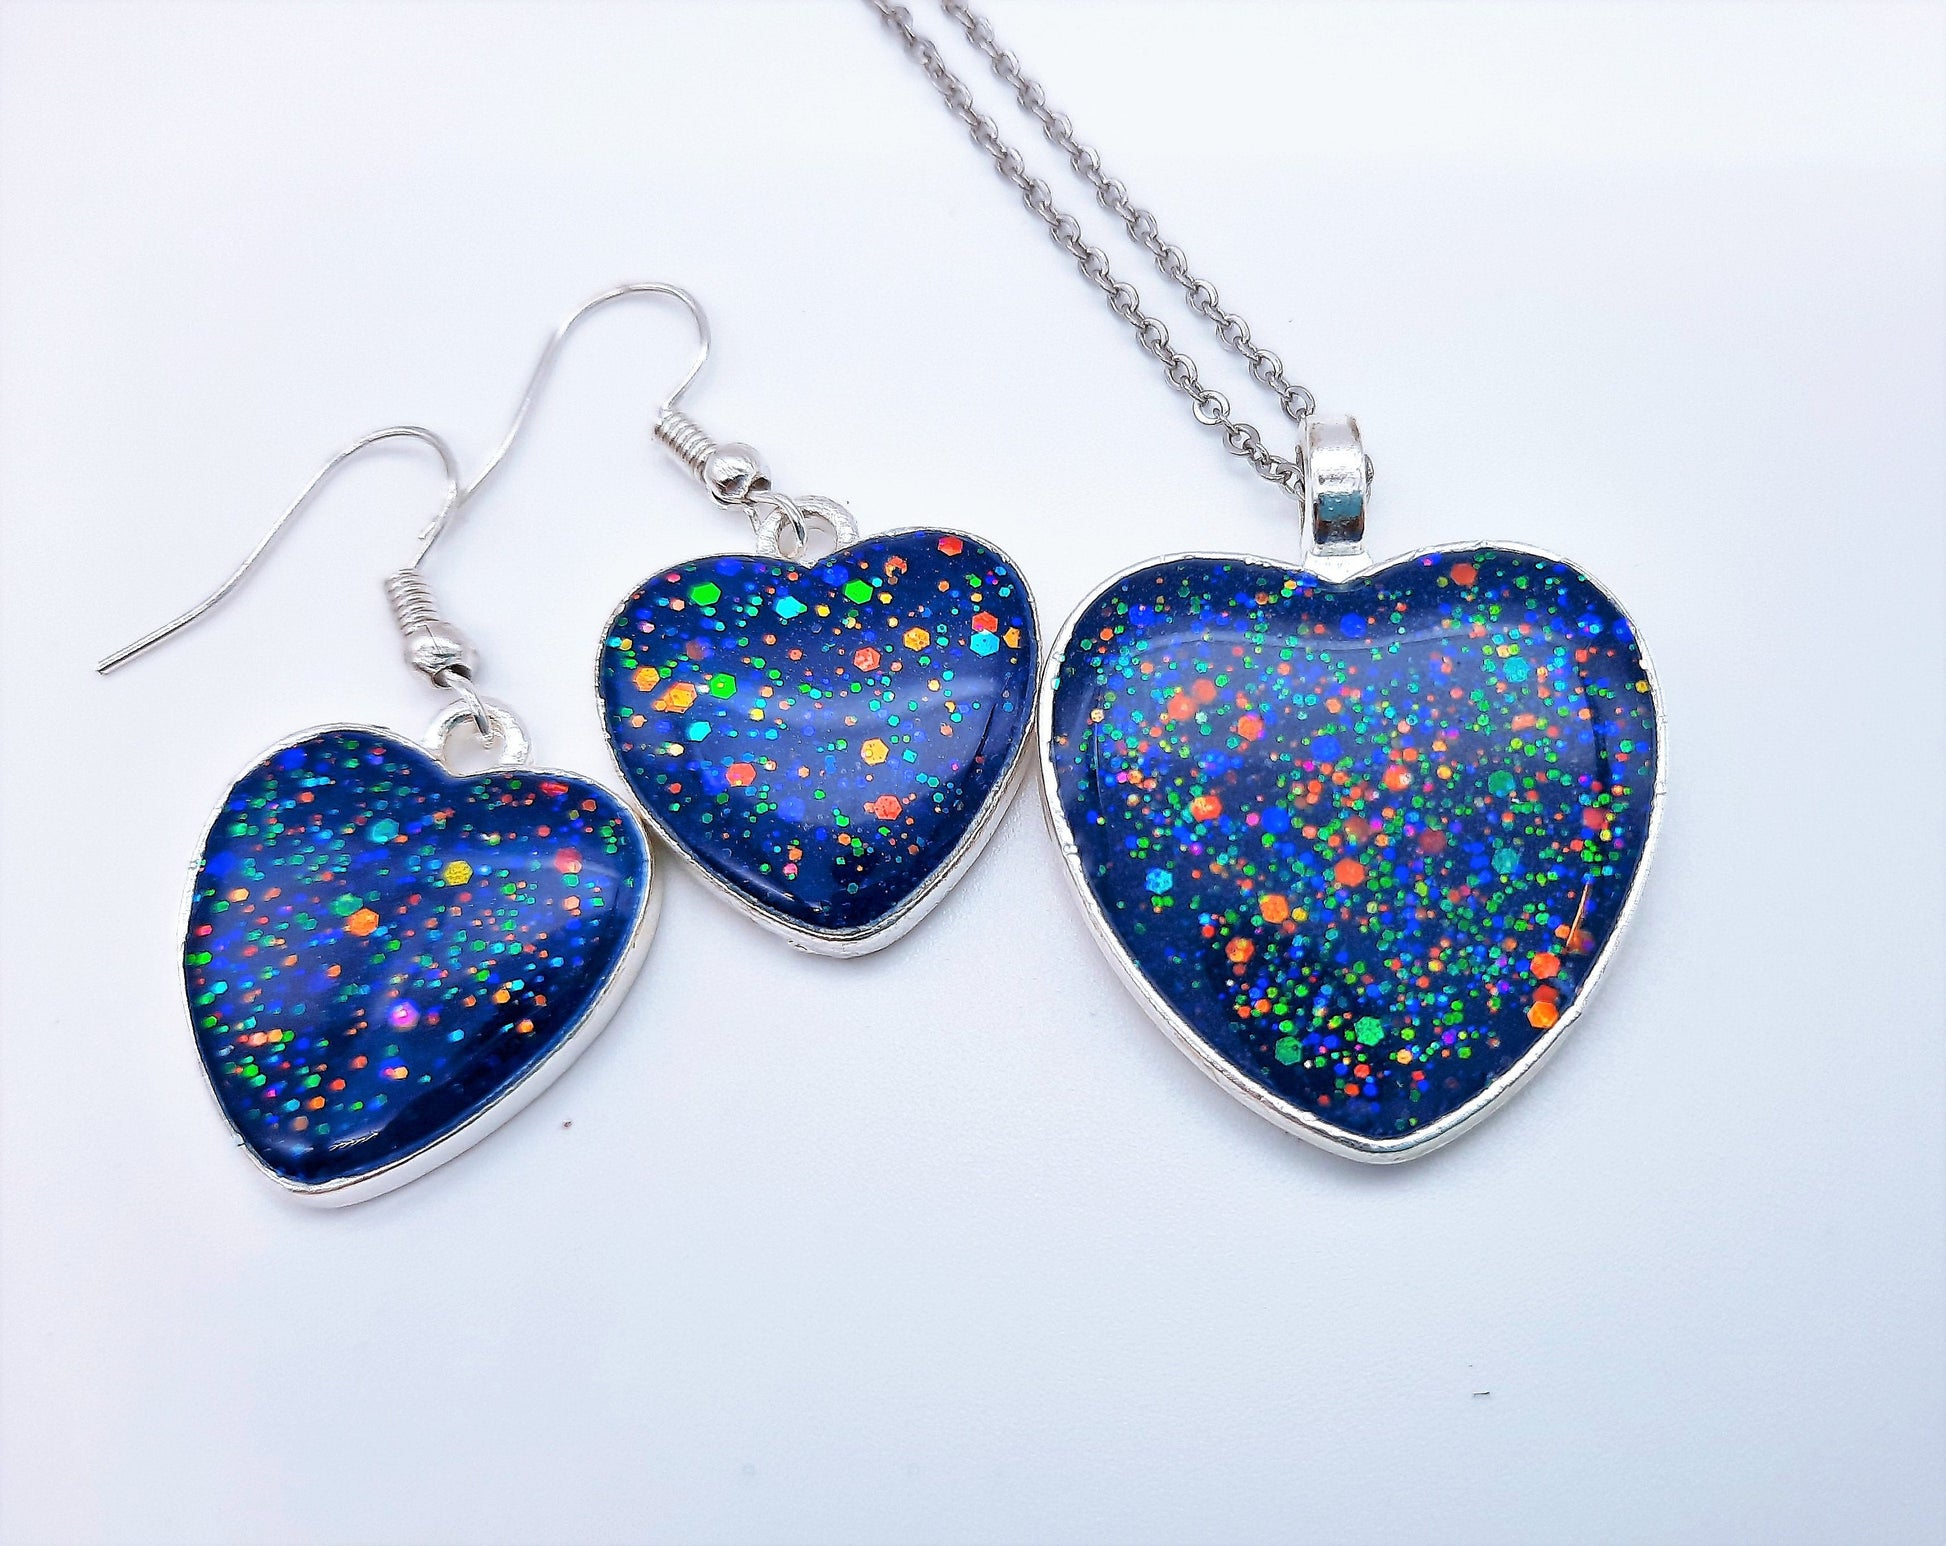 Glitter Sparkle Resin Heart Pendant Necklace / Made with Resin, Mica, Glitter, Glow-in-the-Dark Pigment, Stainless Steel